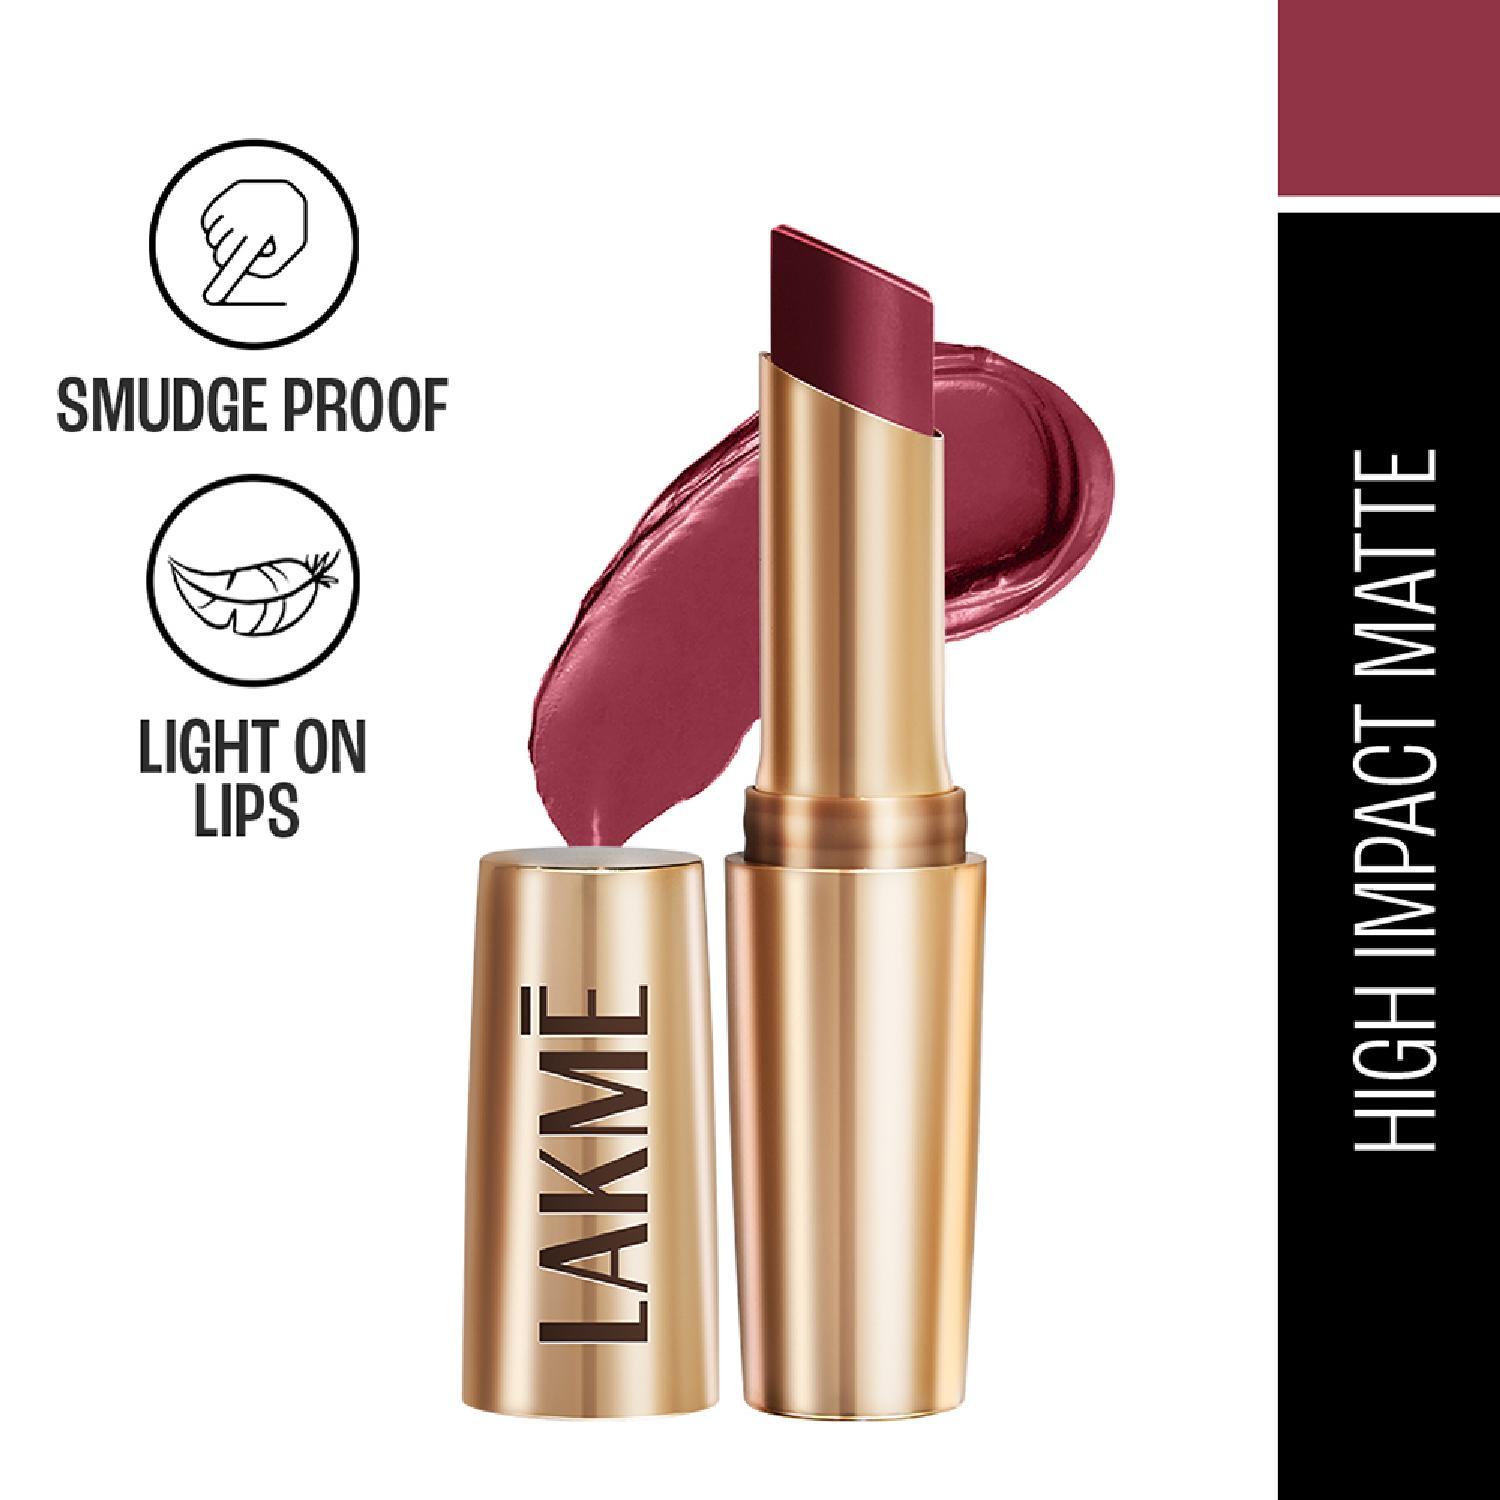 Lakme | Lakme 9 to 5 Powerplay Priming Matte Lipstick, Lasts 16hrs, Maroon Mix (3.6g)